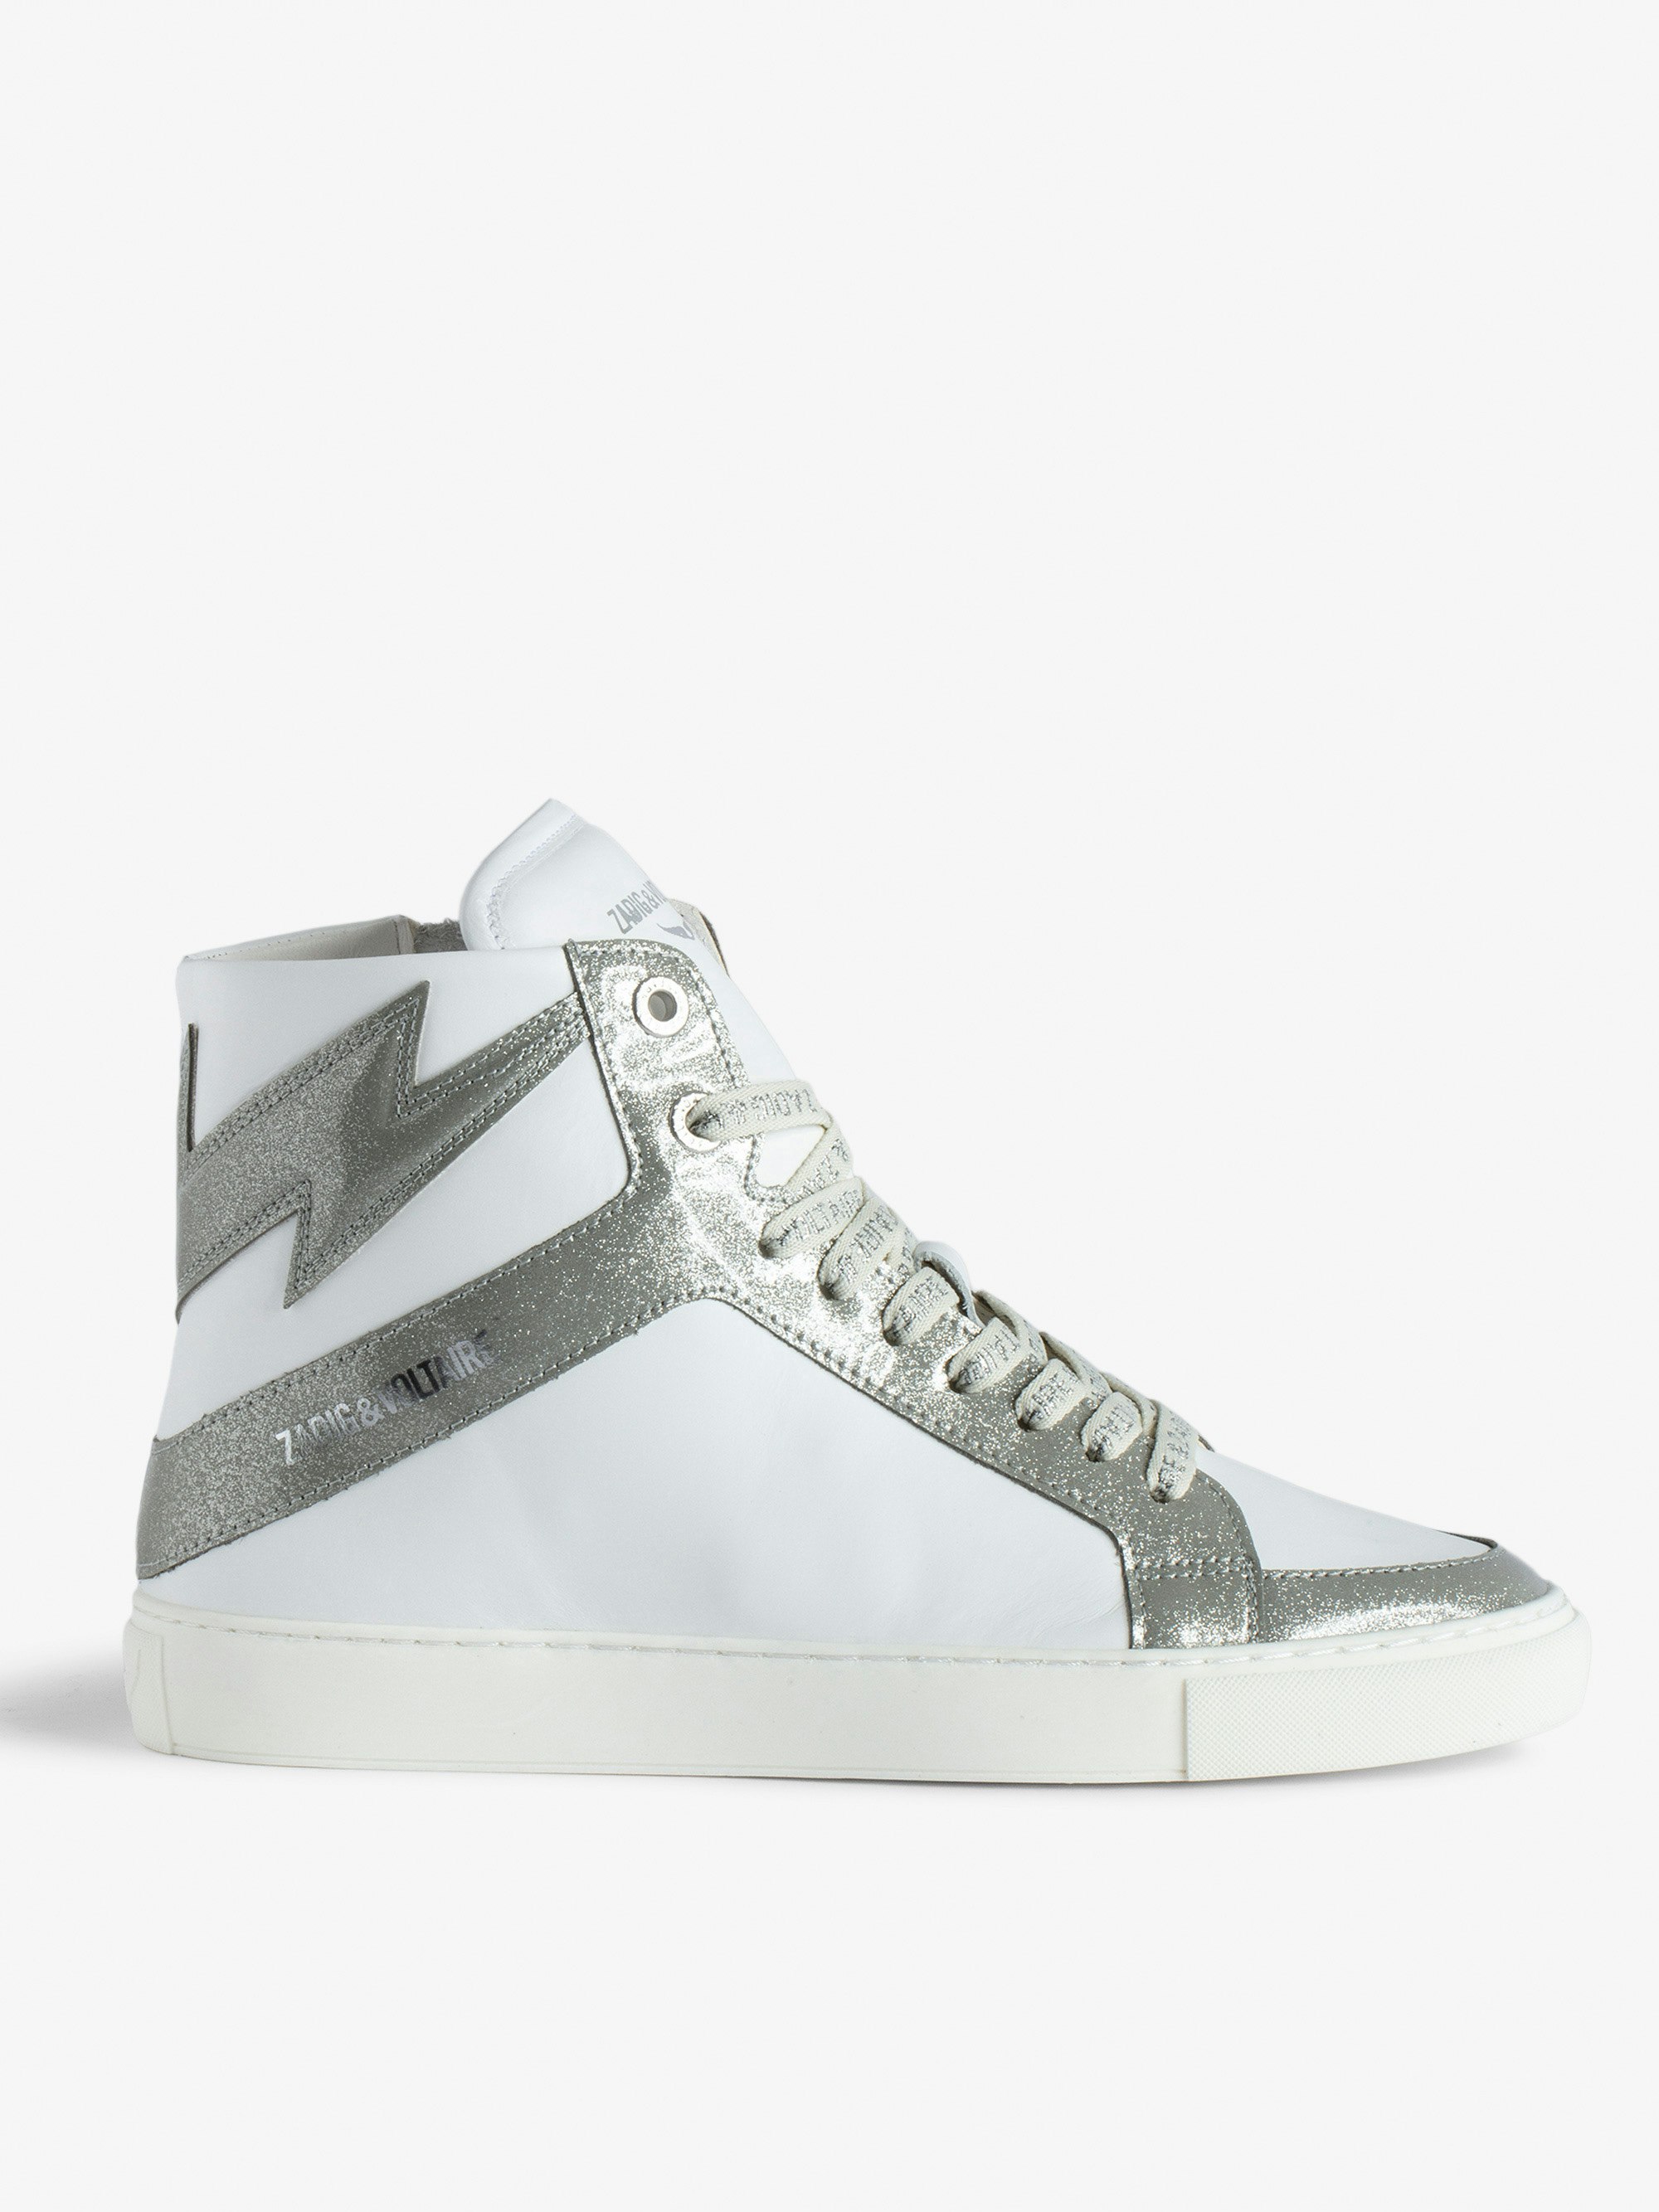 ZV1747 High Flash High-Top Infinity Patent Trainers - Smooth leather and silver glitter high-top trainers with lightning bolt panel.